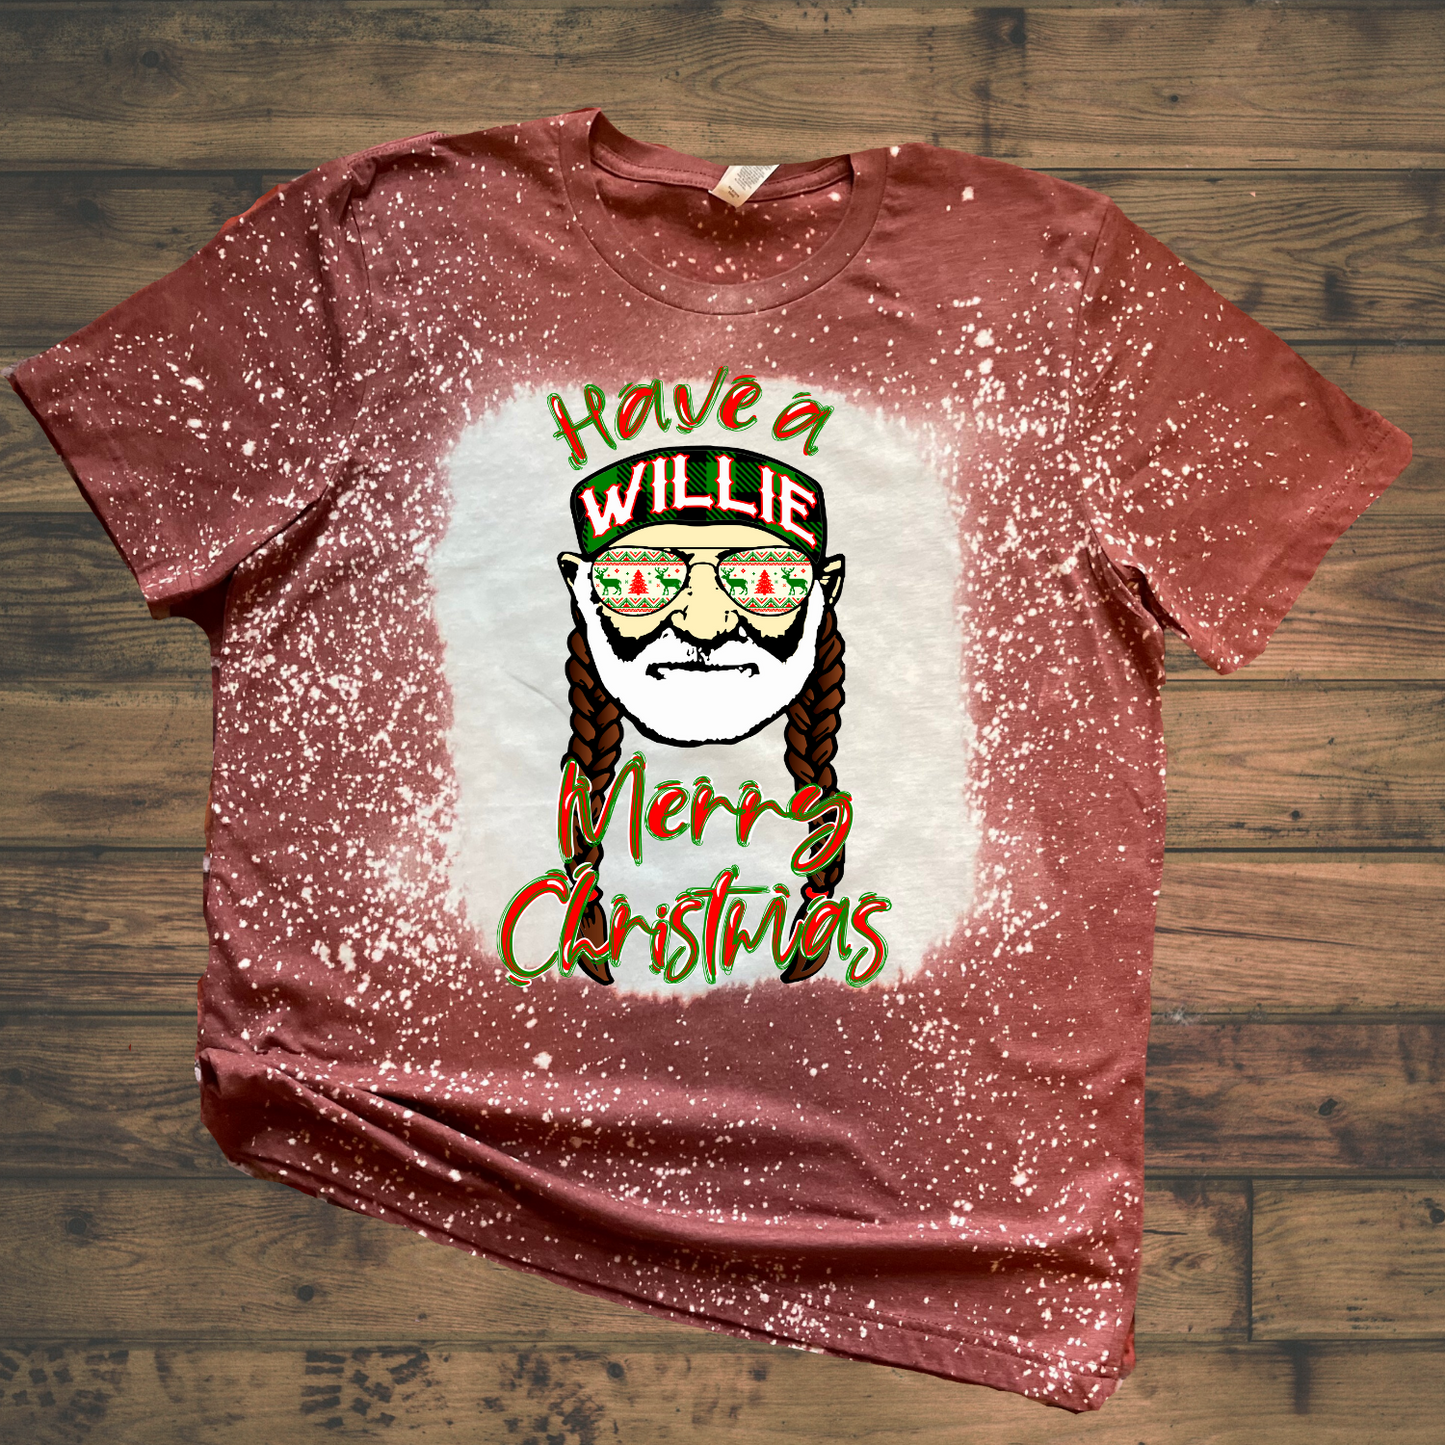 Have a Willie Merry Christmas